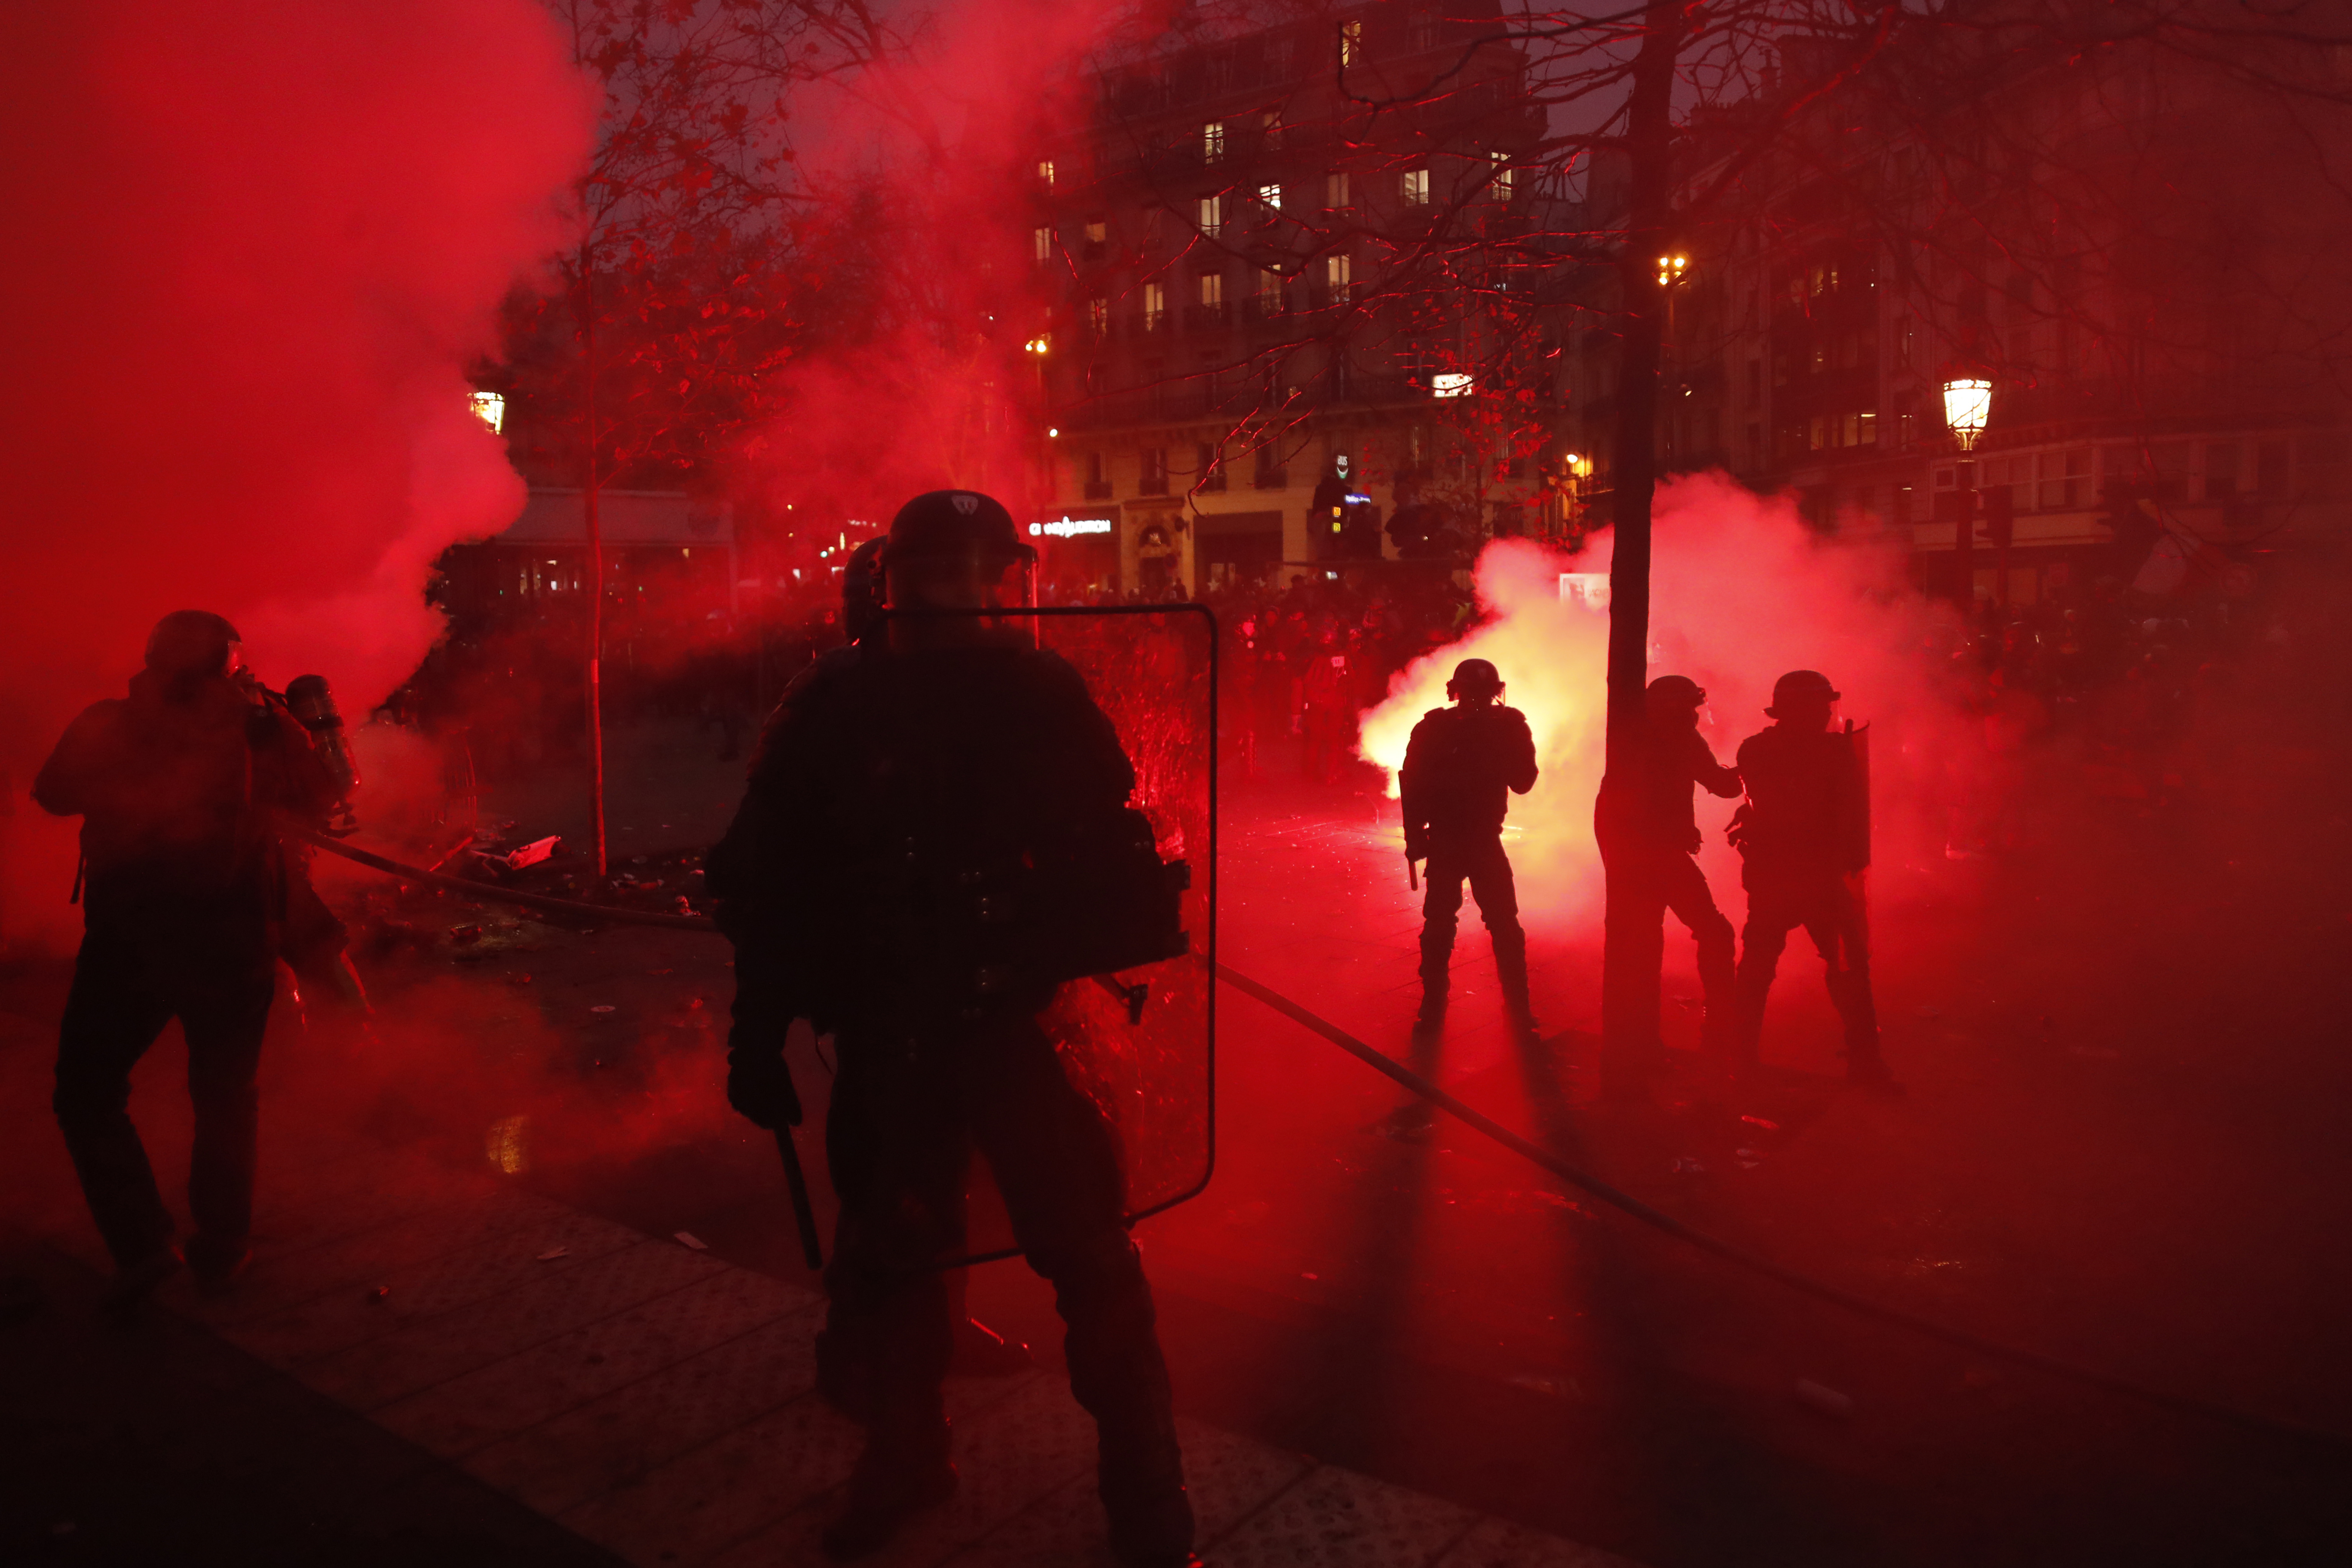 Riot police officers secure an area during a demonstration in Paris, Thursday, Dec. 5, 2019. Small groups of protesters are smashing store windows, setting fires and hurling flares in eastern Paris amid mass strikes over the government's retirement reform. (AP Photo/Thibault Camus)